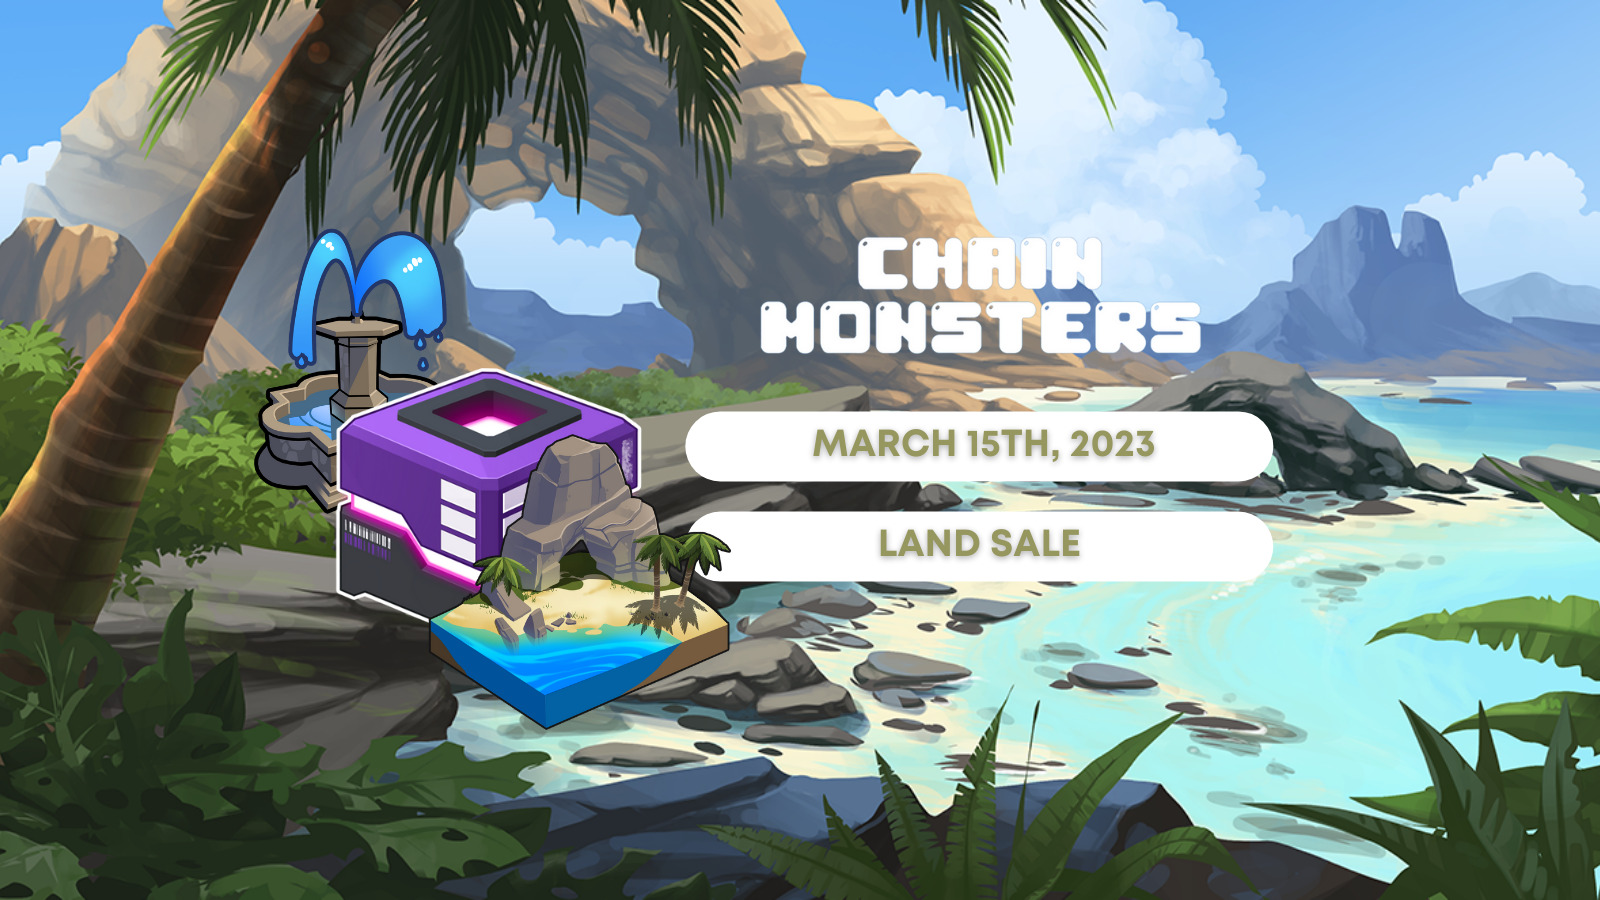 Own an Island with the Chainmonsters Land Sale